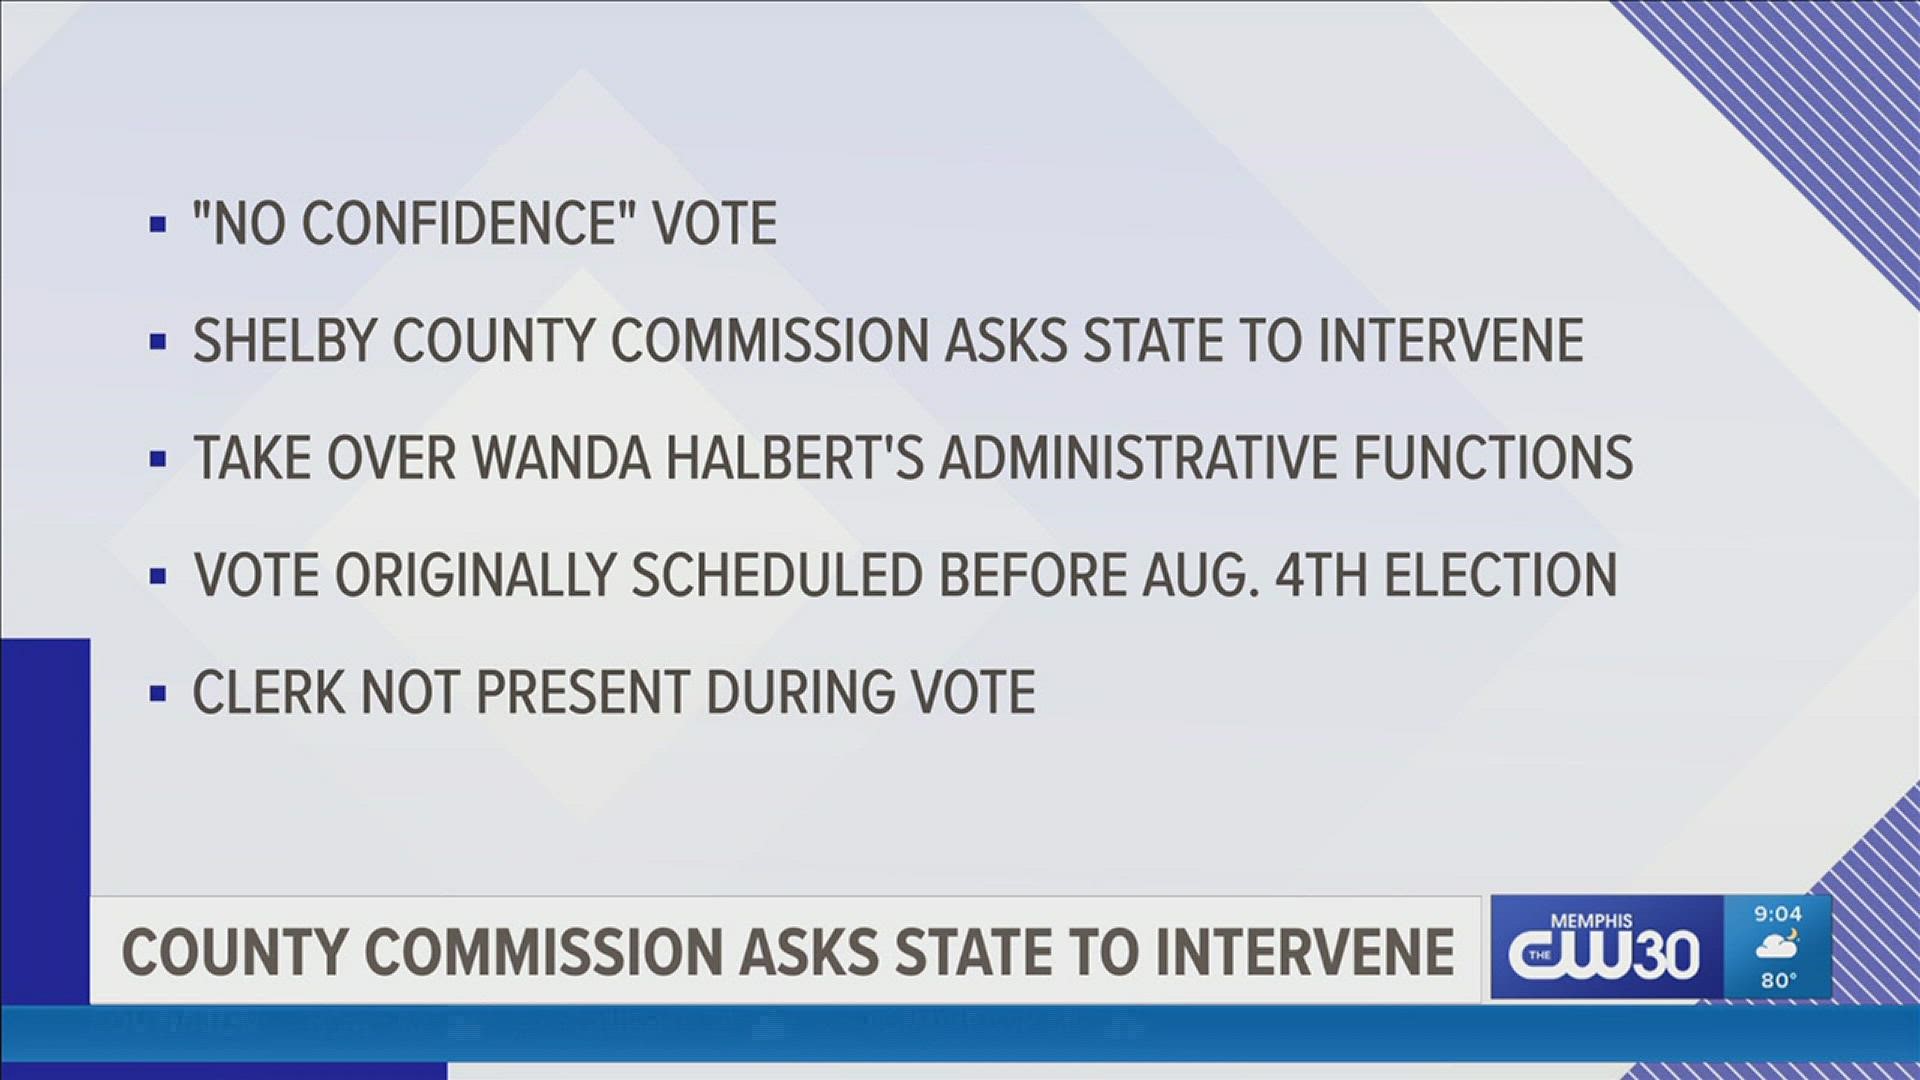 The "no confidence" vote, originally scheduled before the Aug. 4 election, was postponed days before.